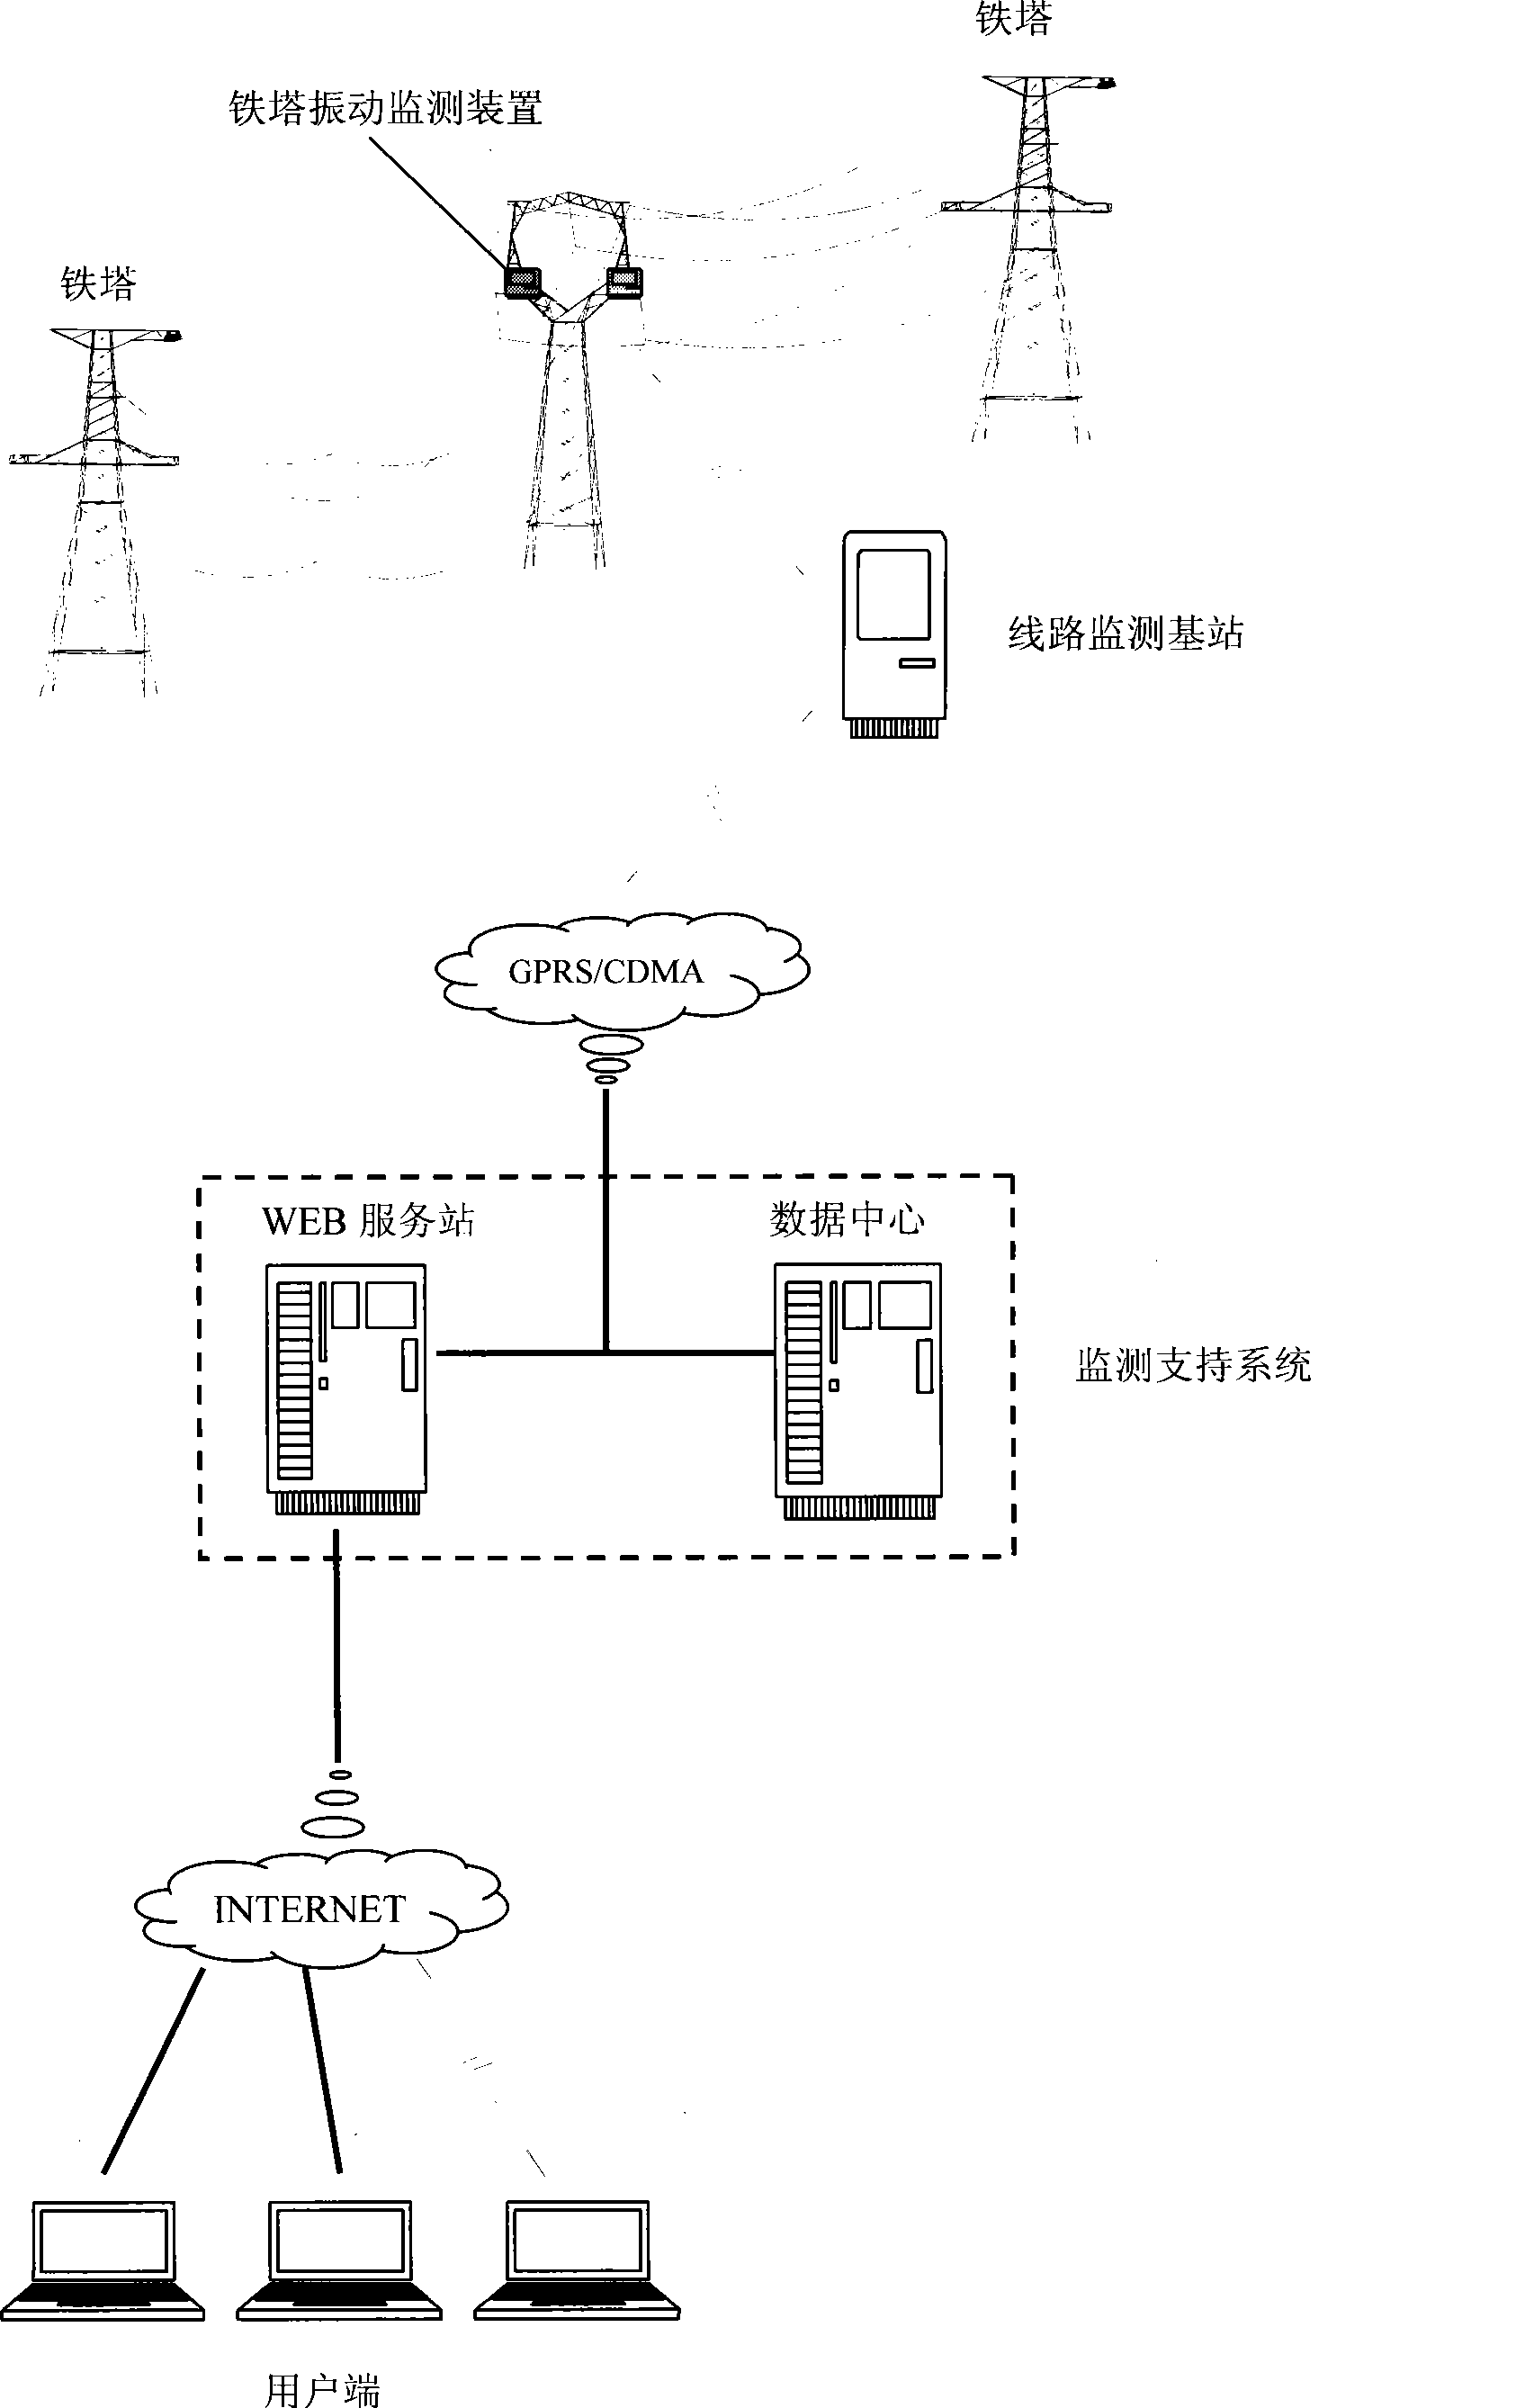 Method for testing vibration of high-tower structure of transmission line